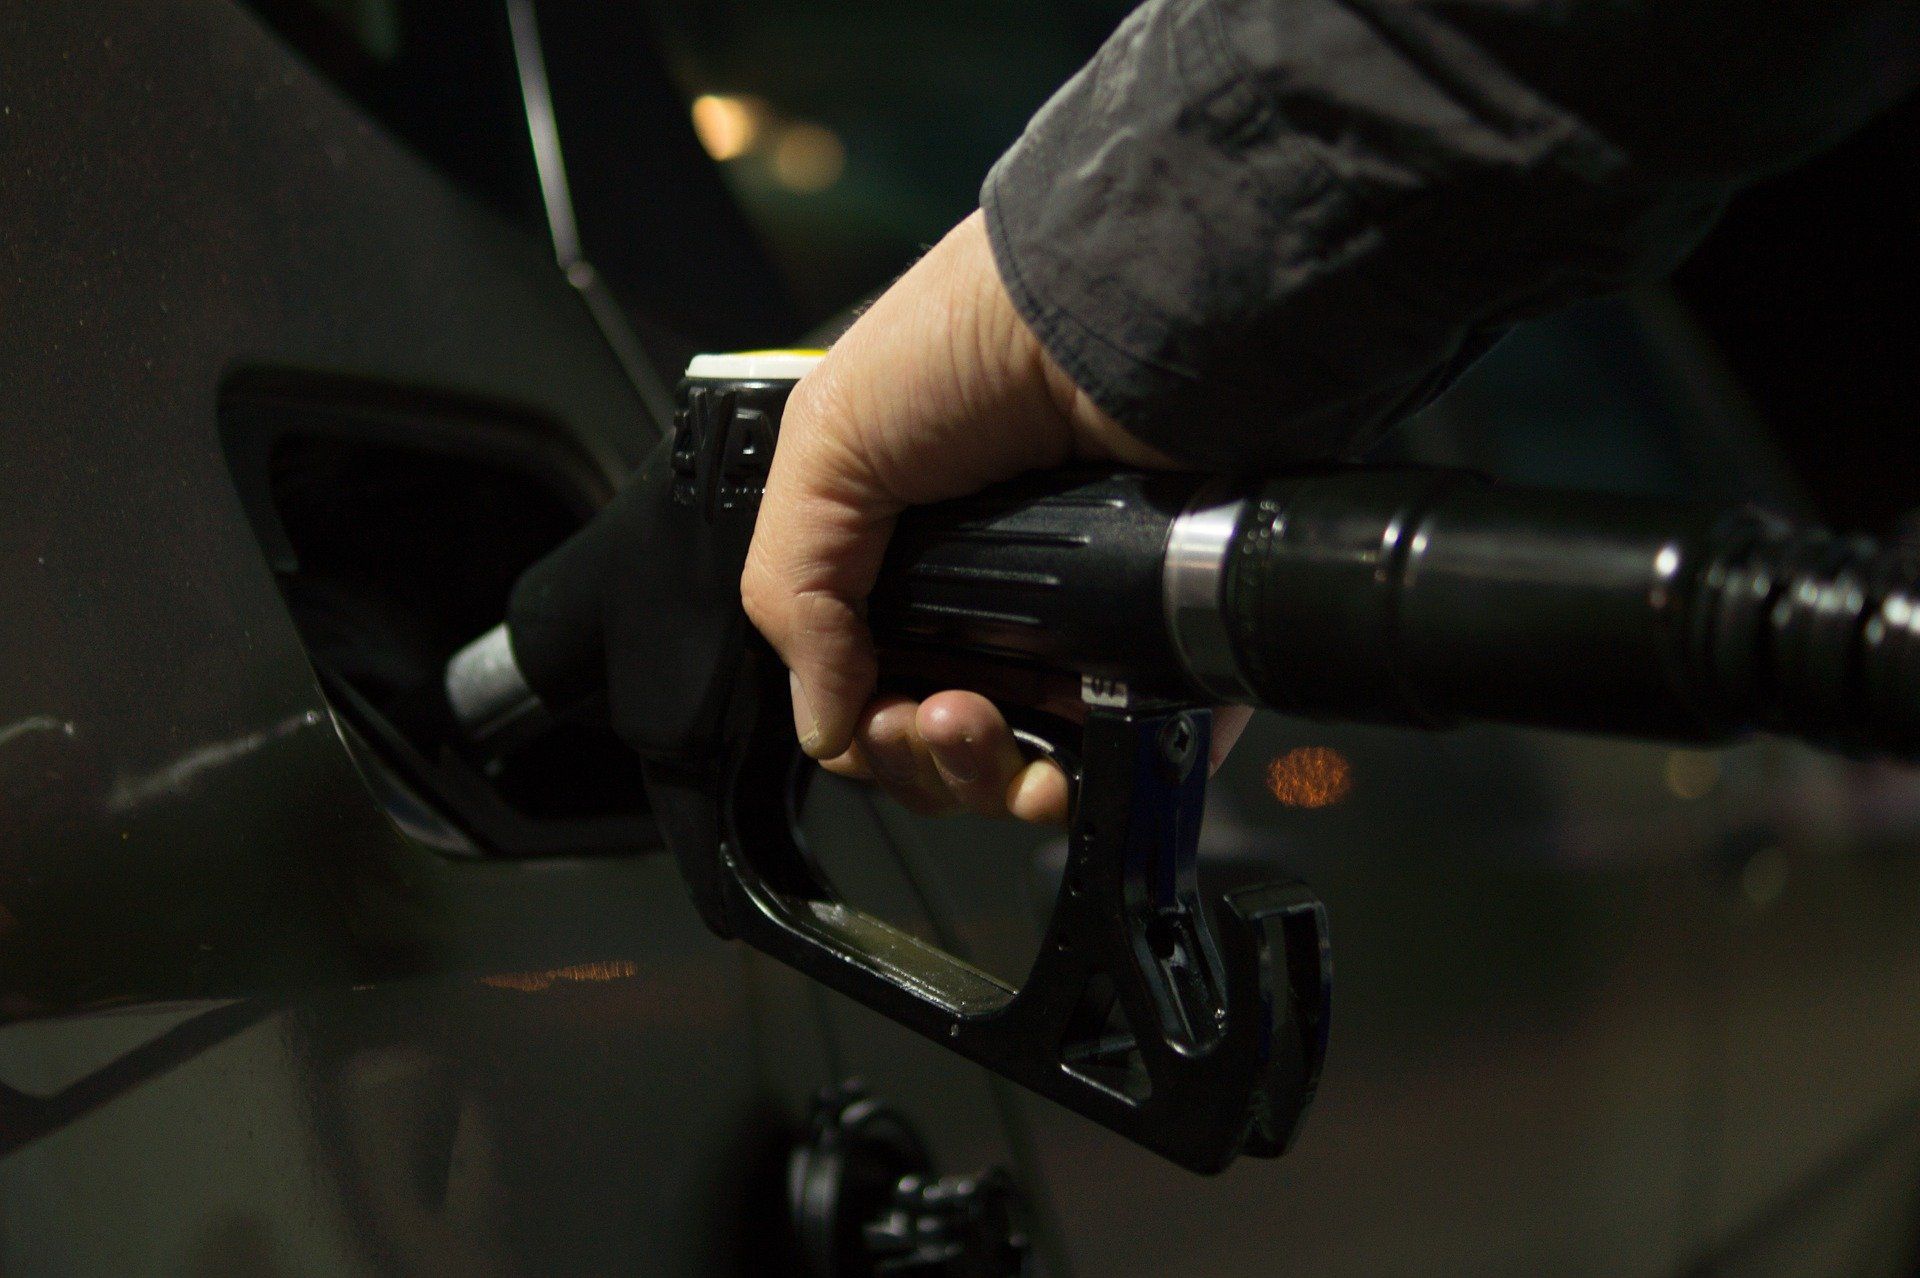 Fuel prices today: Petrol priced at Rs 95.41, diesel Rs 86.67 in Delhi on January 10, 2022